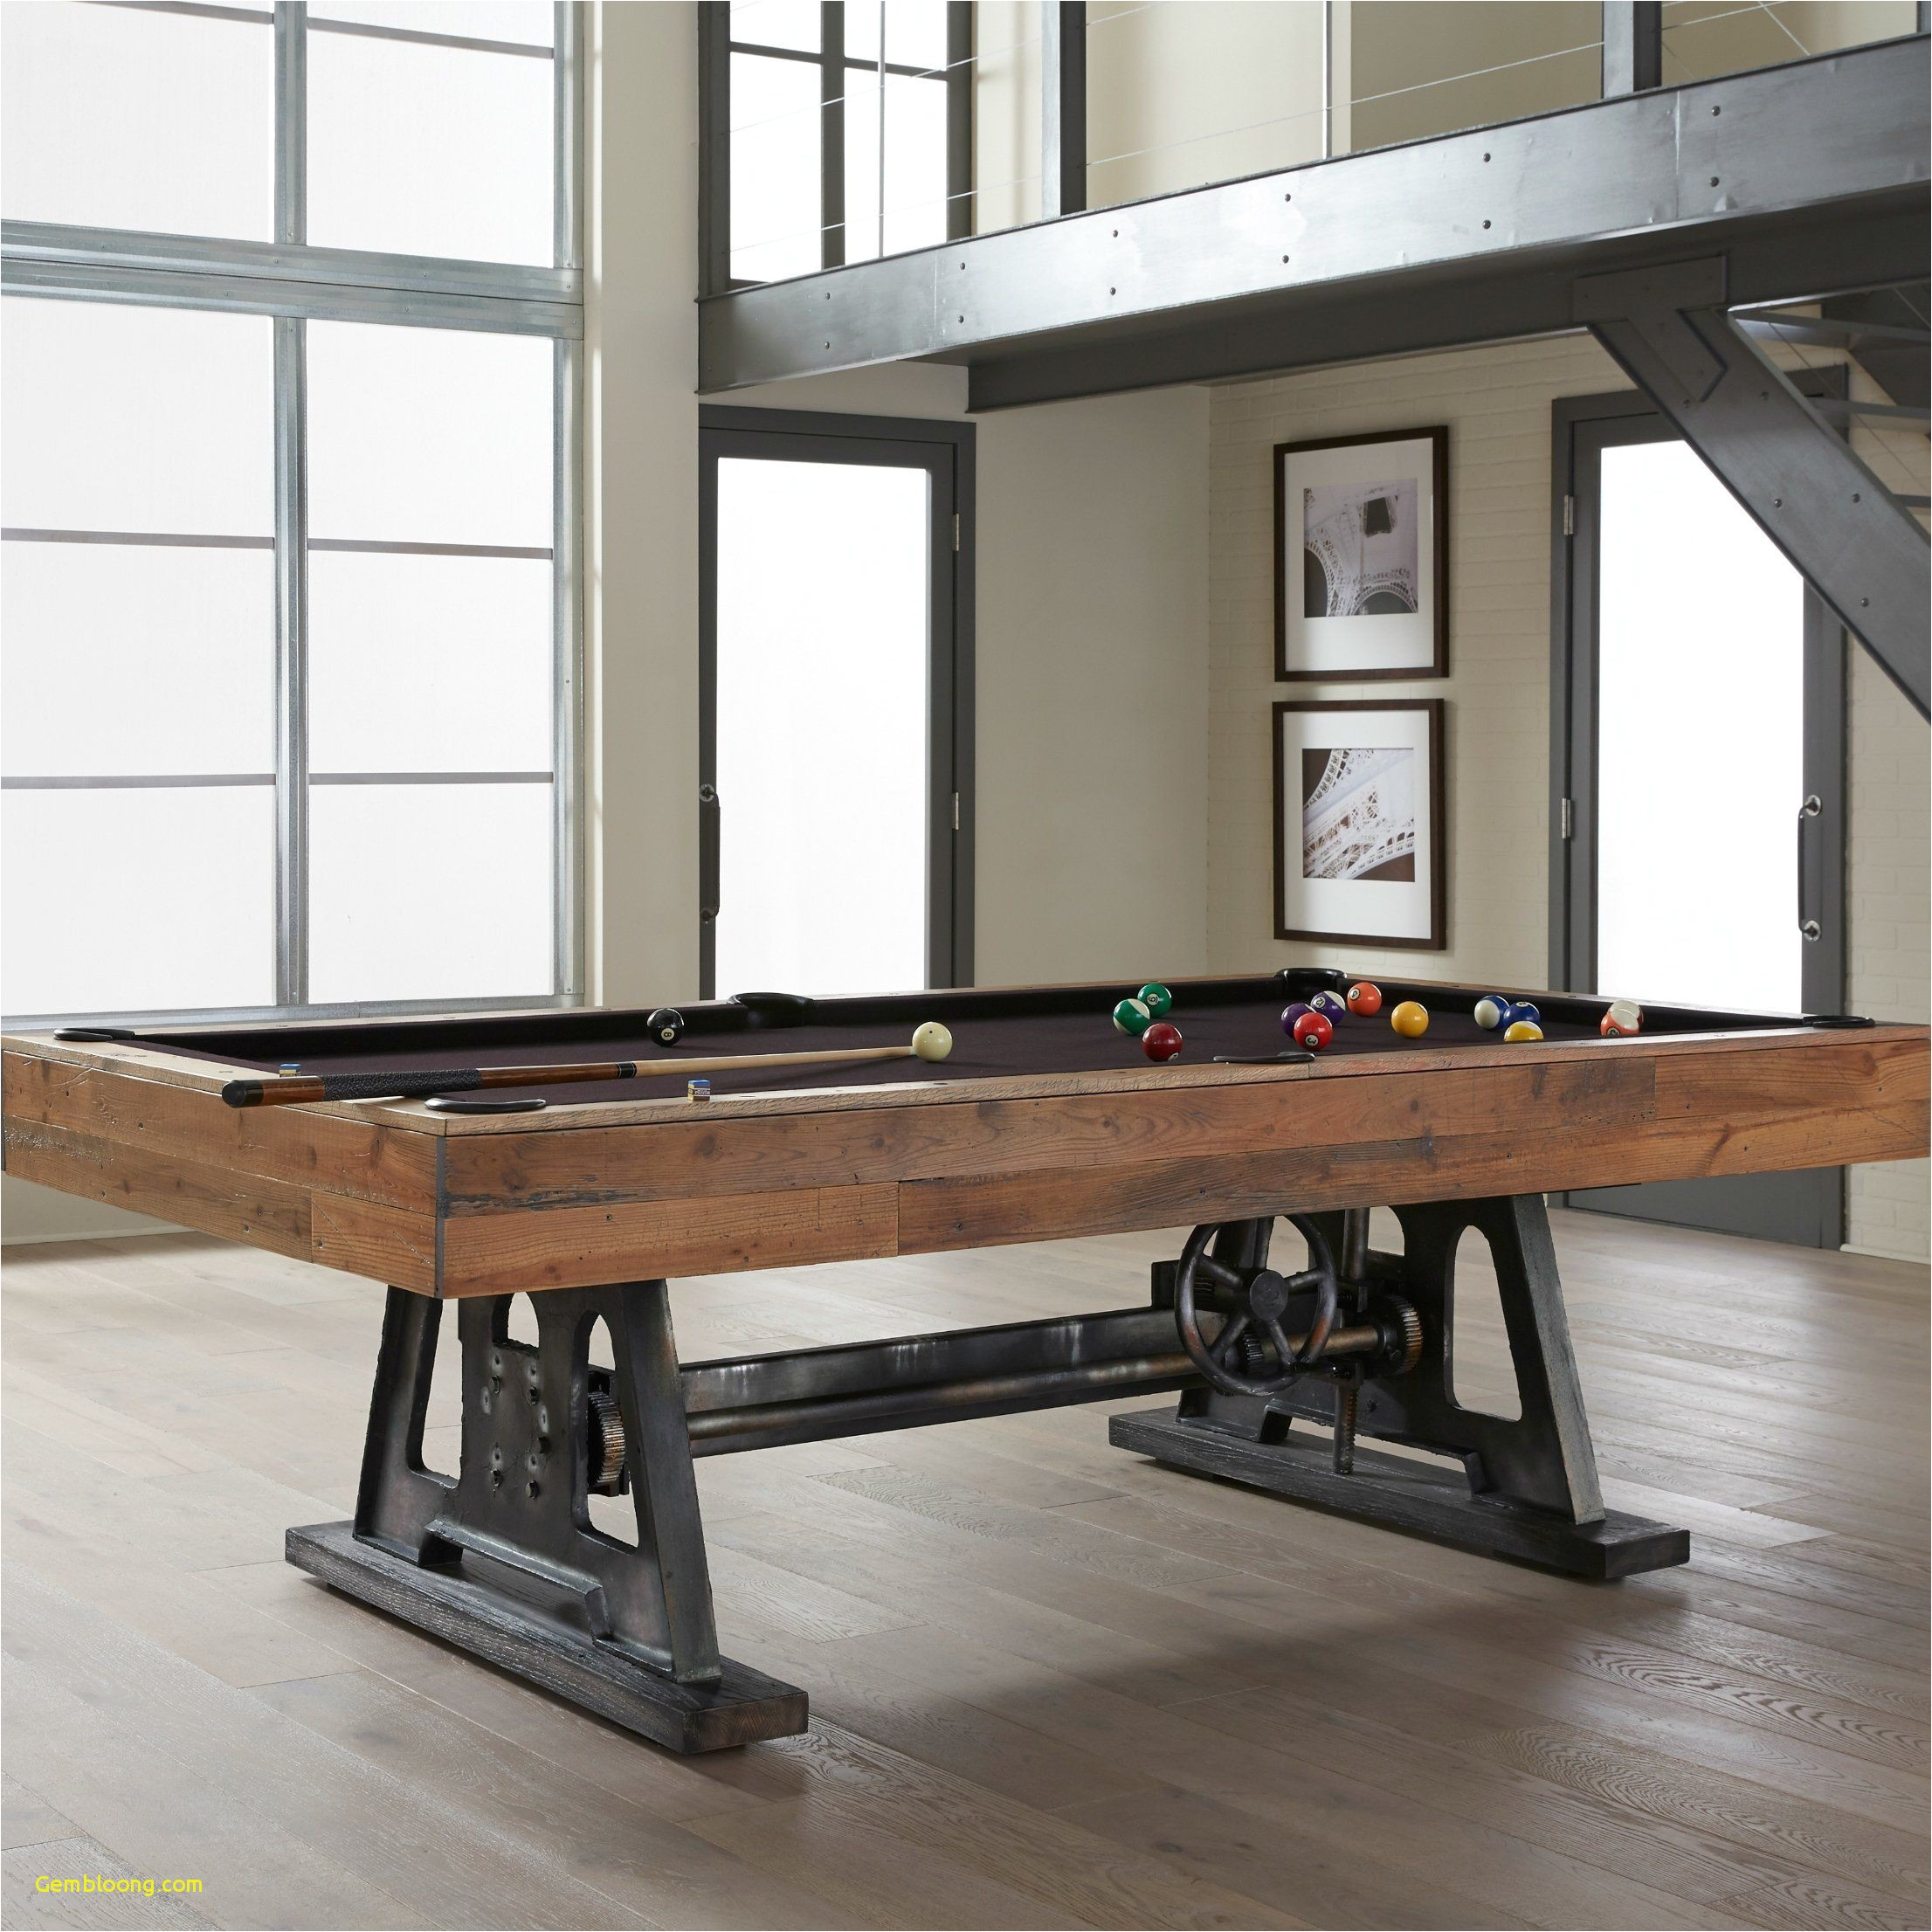 Pool Table Moving Houston 10 Beautiful Pool Table Moving Service Bossconseil